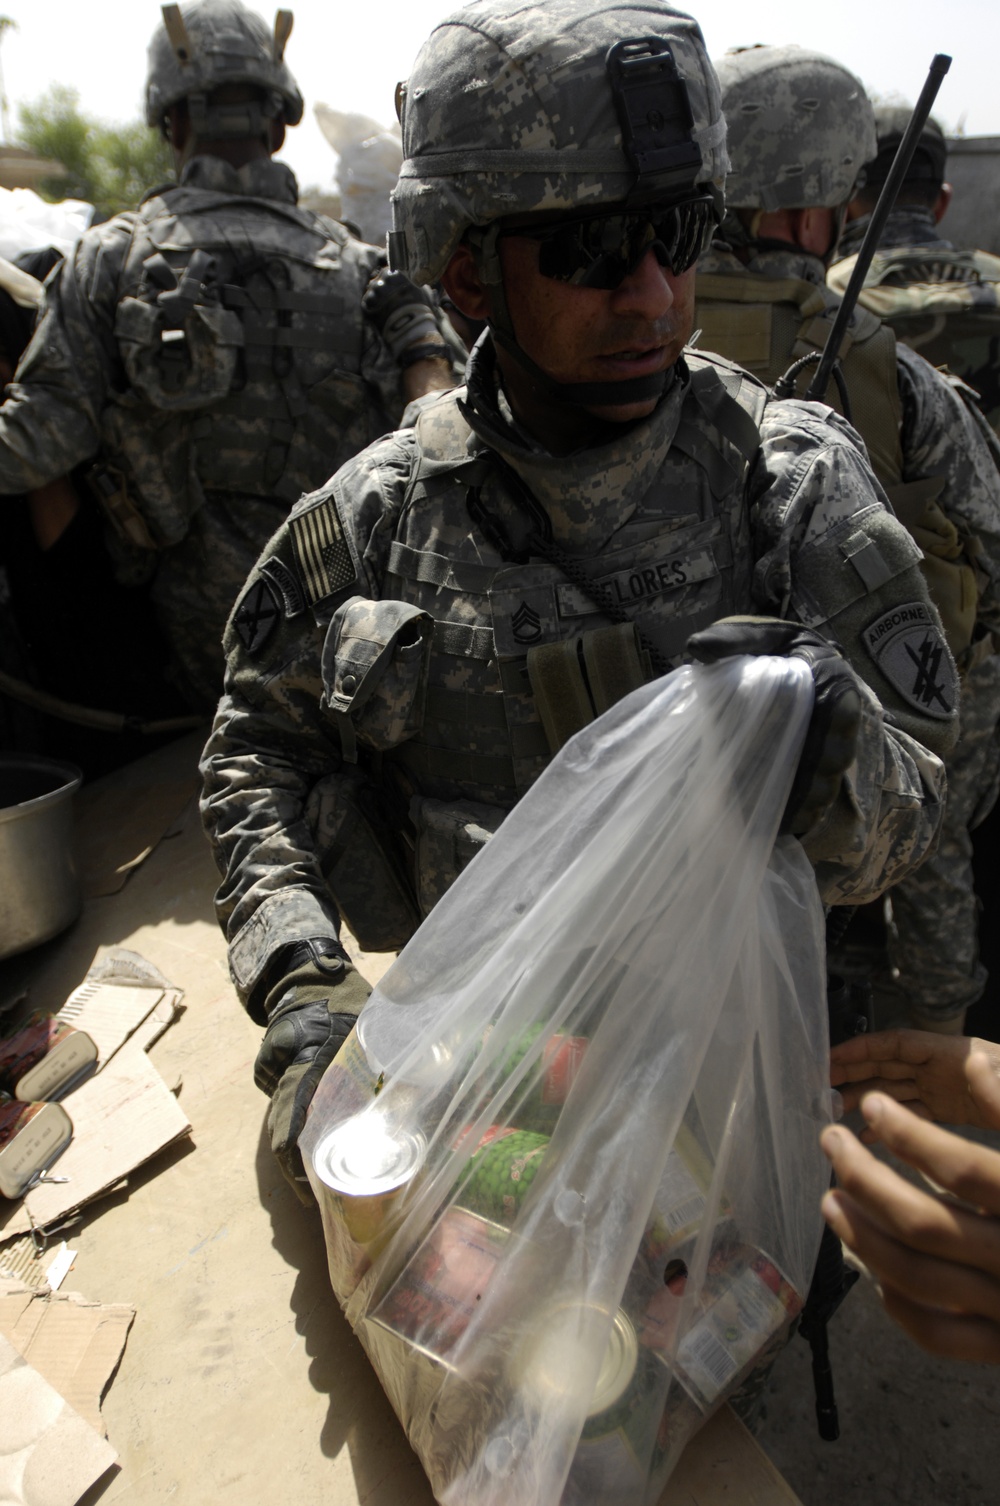 Tactical PsyOps Team Hands Out 1500 Pounds of Food